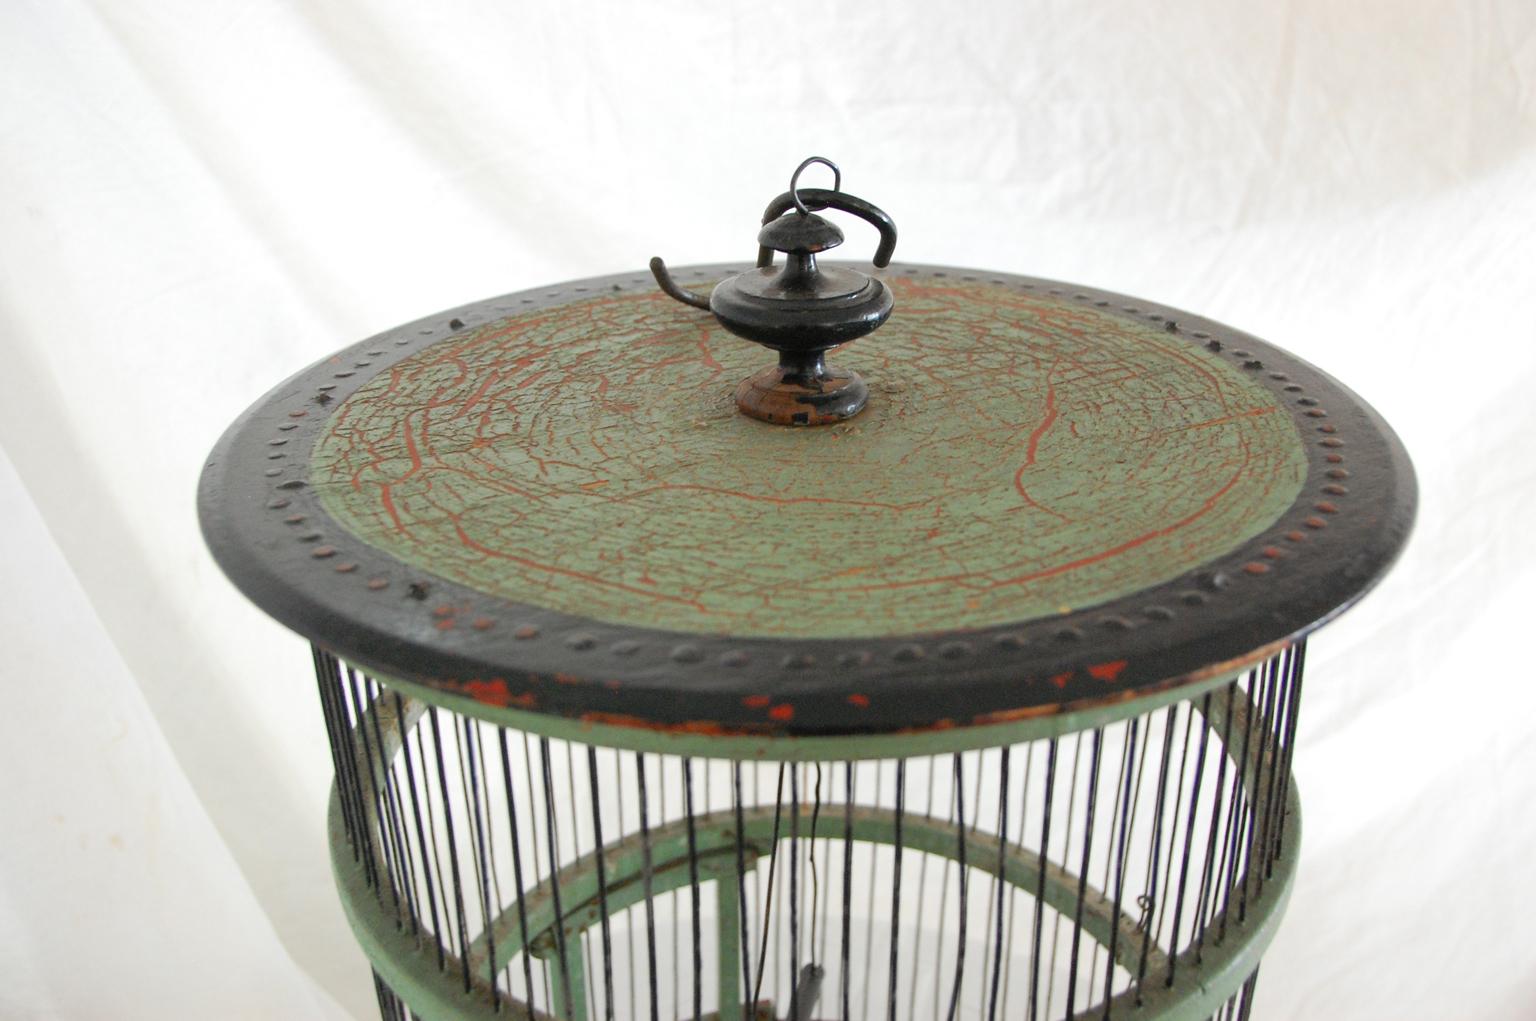 French 19th century painted green wood and wire birdcage of round form, with external protrusions for food and perching and internal swinging perch, late 19th century.